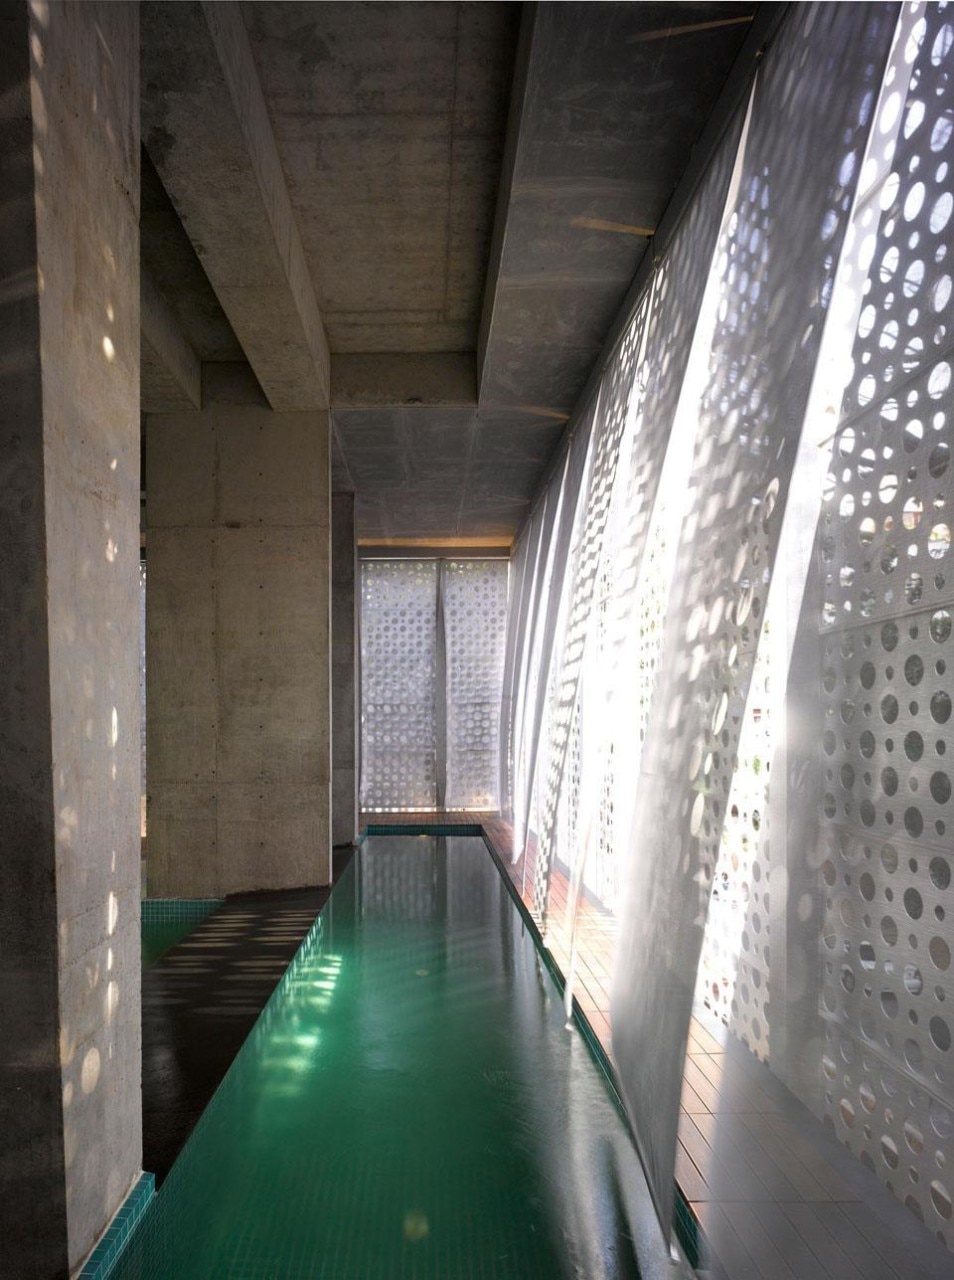 The metal screen allows the light to penetrate inside while assuring privacy in the swimming pool 